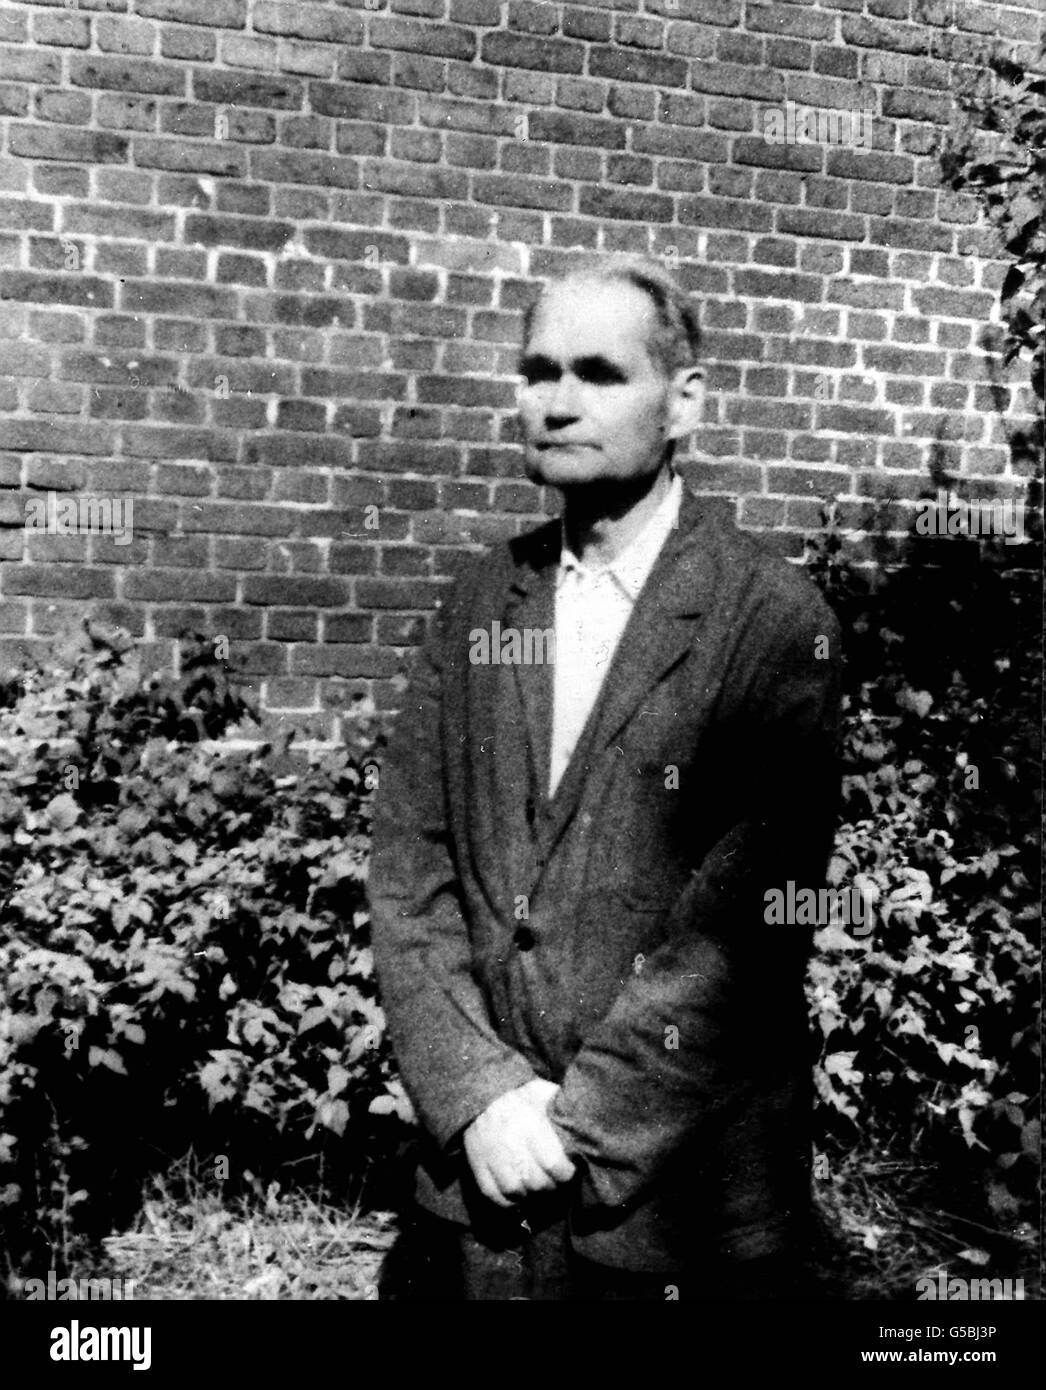 RUDOLF HESS 1982: Adolf Hitler's former Deputy, Rudolf Hess, in the garden of Spandau Prison, Berlin. Hess served a life sentence after being convicted of war crimes at the Nuremberg trials in 1946. He died in August 1987 aged 93. Stock Photo